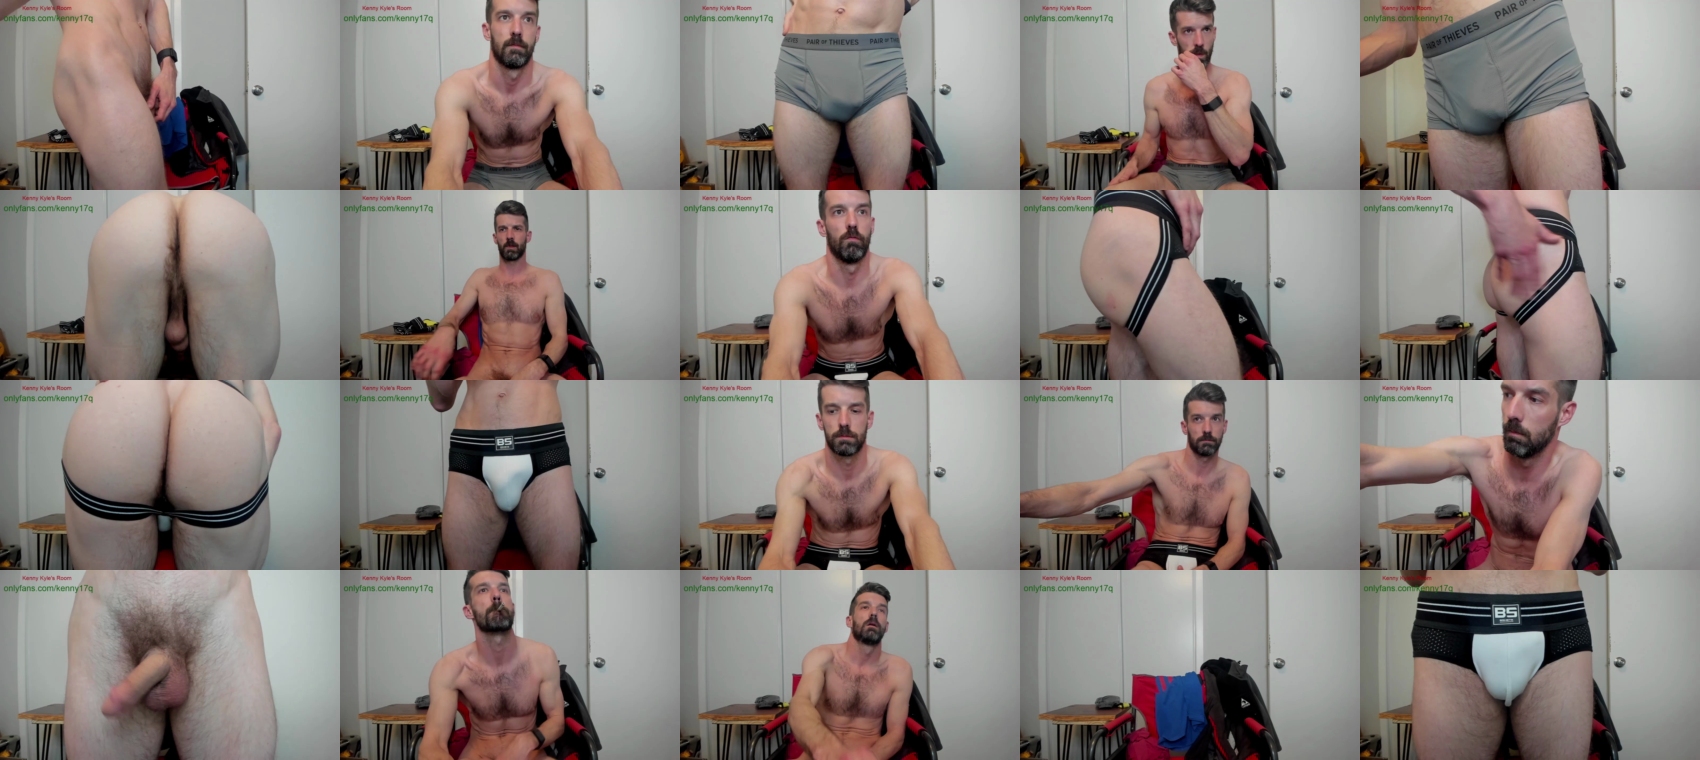 kennykyle show CAM SHOW @ Chaturbate 08-02-2022